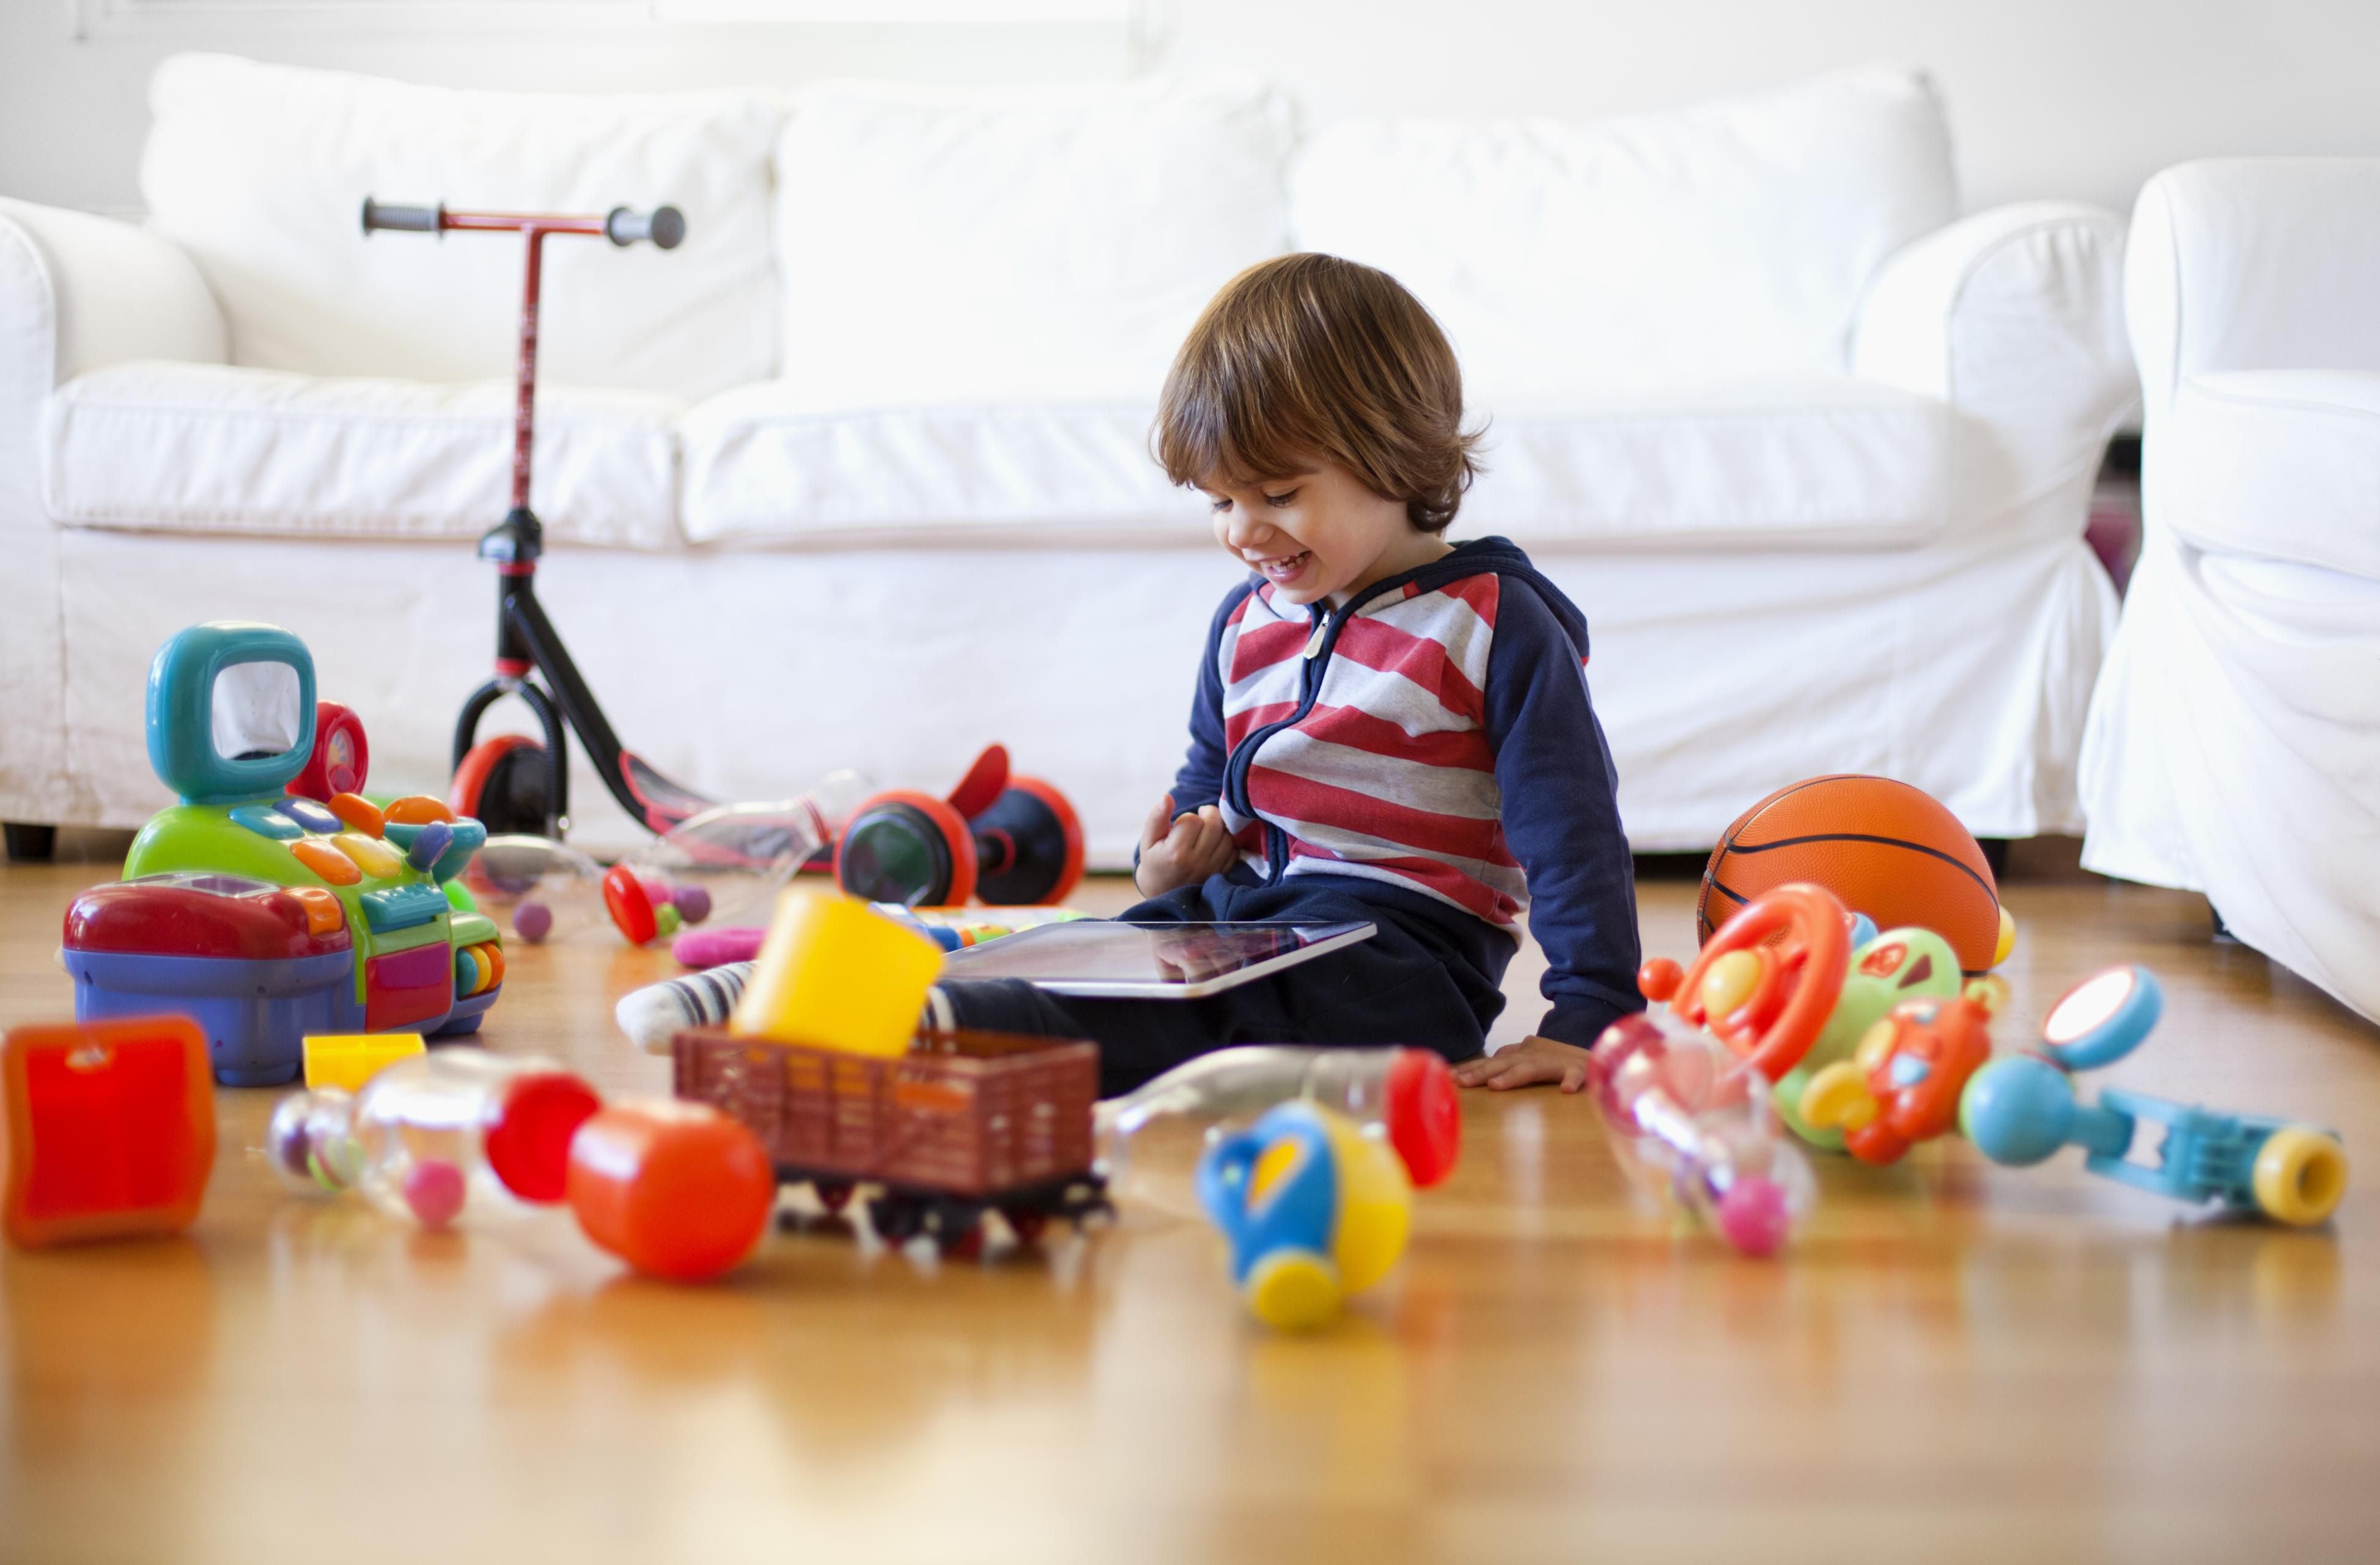 Creative Solutions for Kid-Friendly Toy Storage: A Parent's Guide